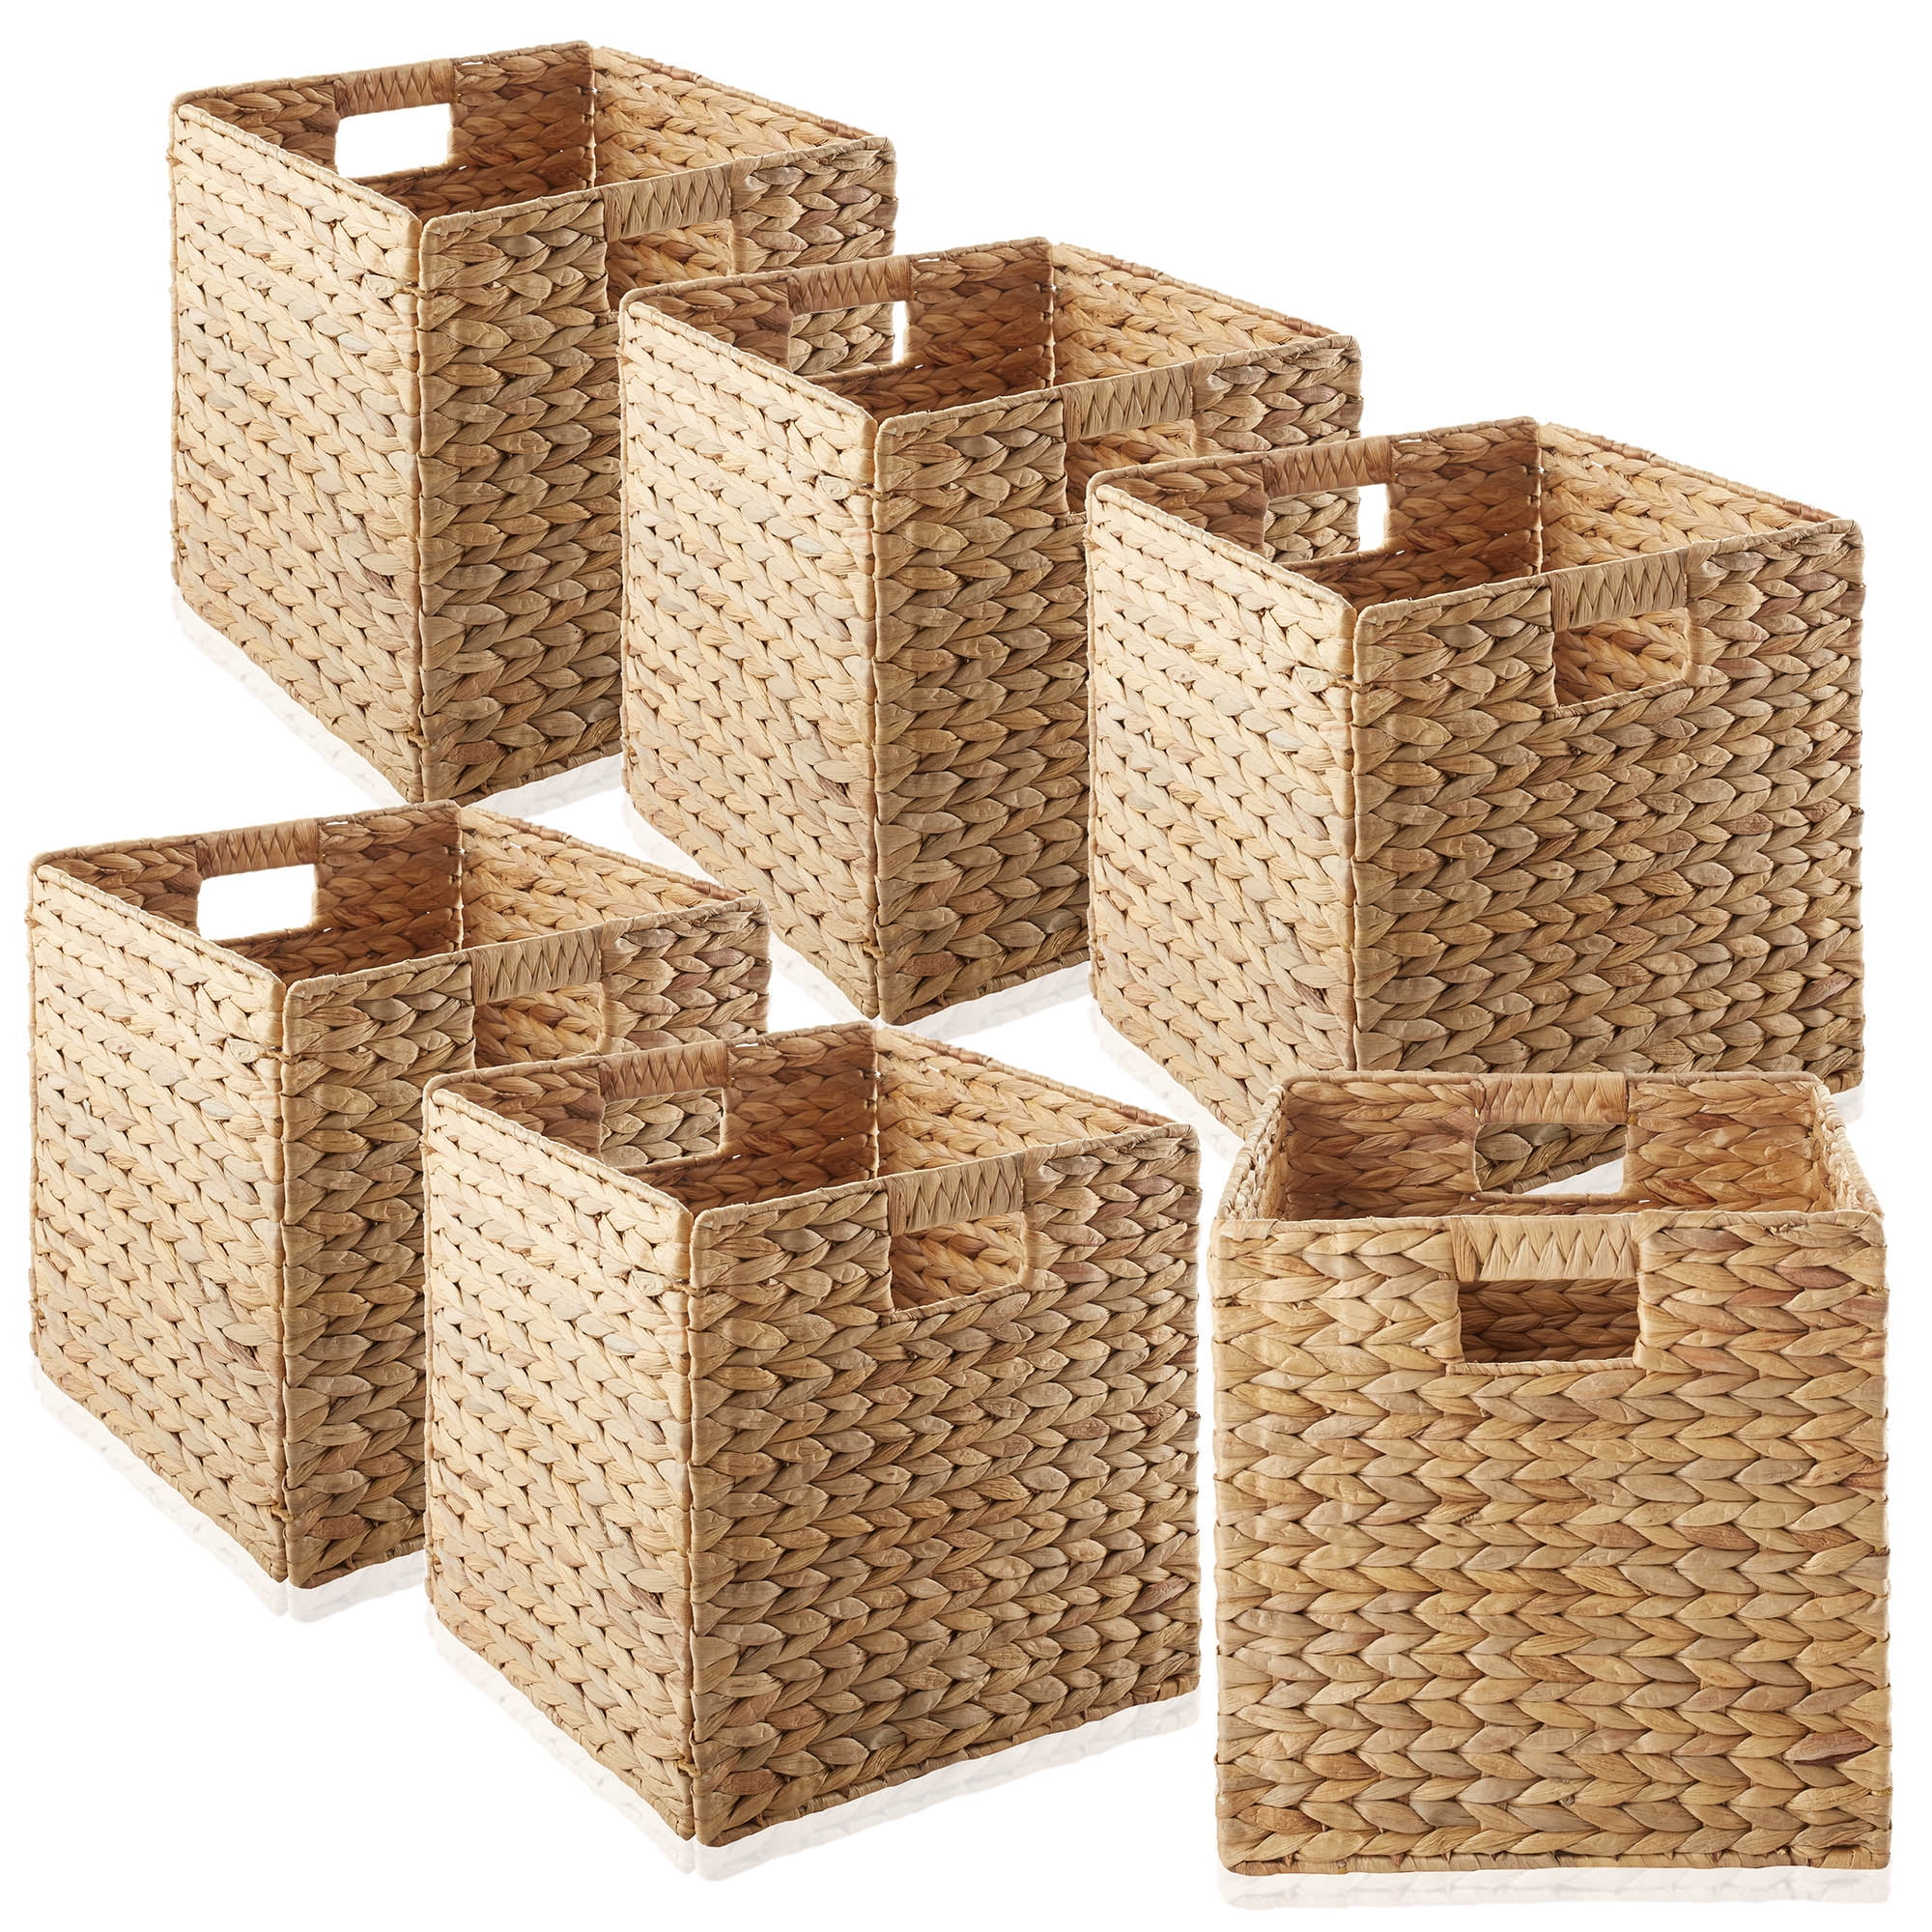 HBlife Wicker Baskets, Set of 3 Hand-Woven Paper Rope Storage Baskets,  Foldable Cubby Storage Bins, Large Wicker Storage Basket for Shelves Pantry